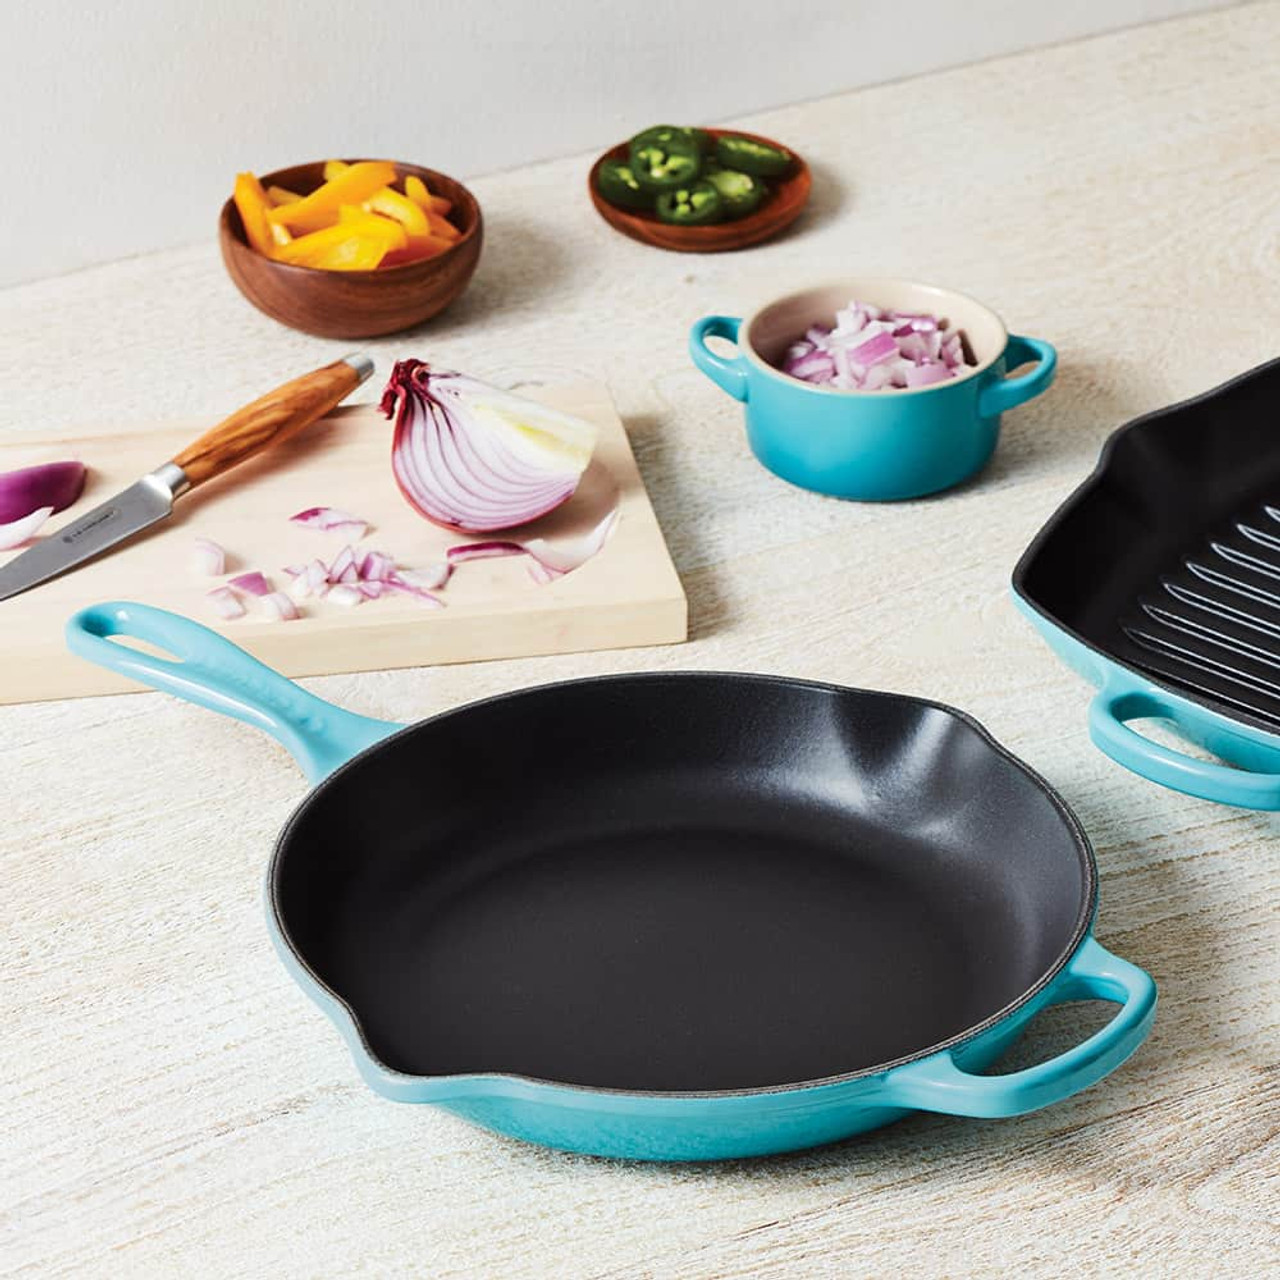 https://cdn11.bigcommerce.com/s-hccytny0od/images/stencil/1280x1280/products/1895/6453/le-creuset-signature-skillet-caribbean__29330.1626897049.jpg?c=2?imbypass=on